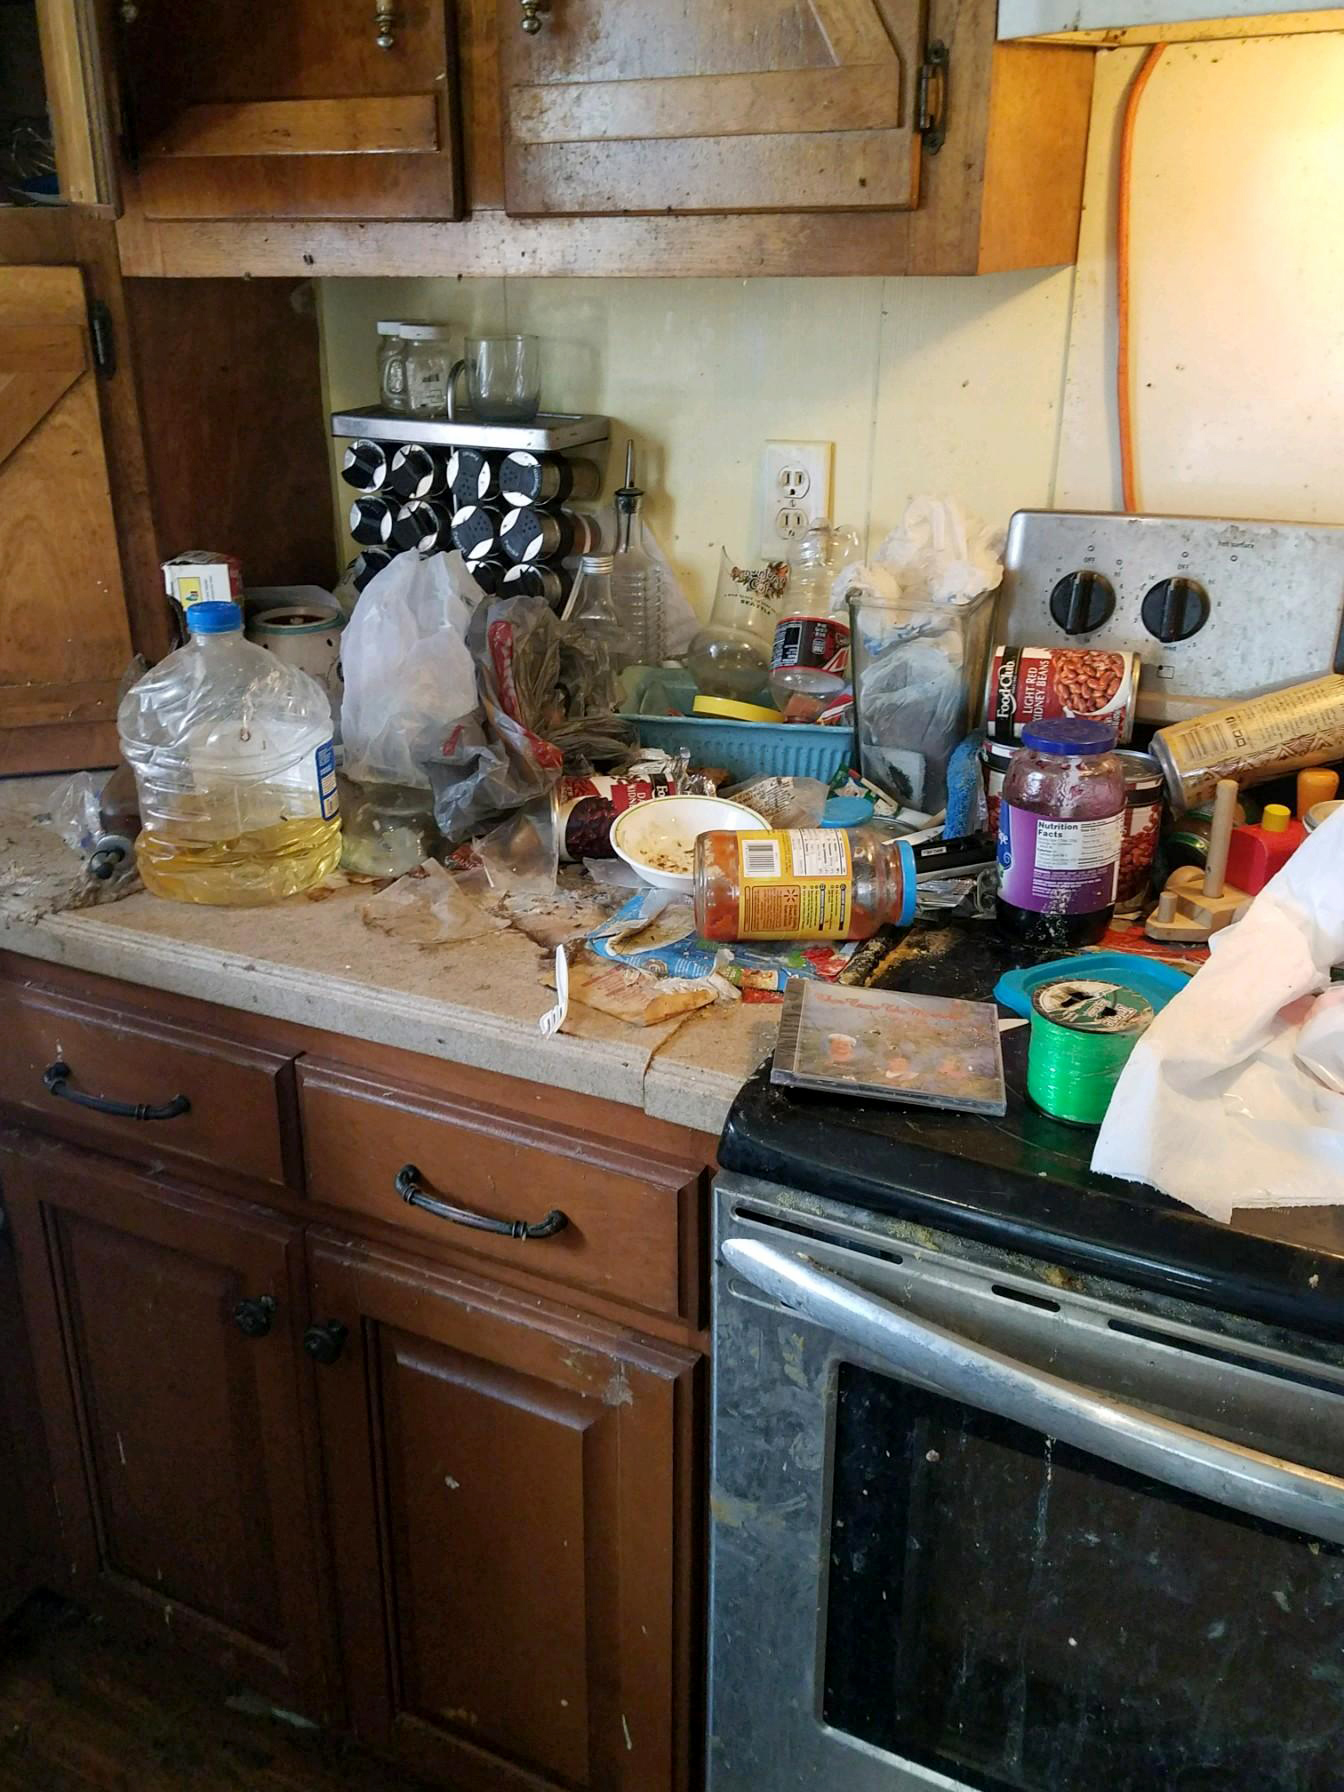 PHOTO: Three children and 21 animals were removed from a home in Soddy-Daisy, Tennessee in "deplorable" conditions, police said. 